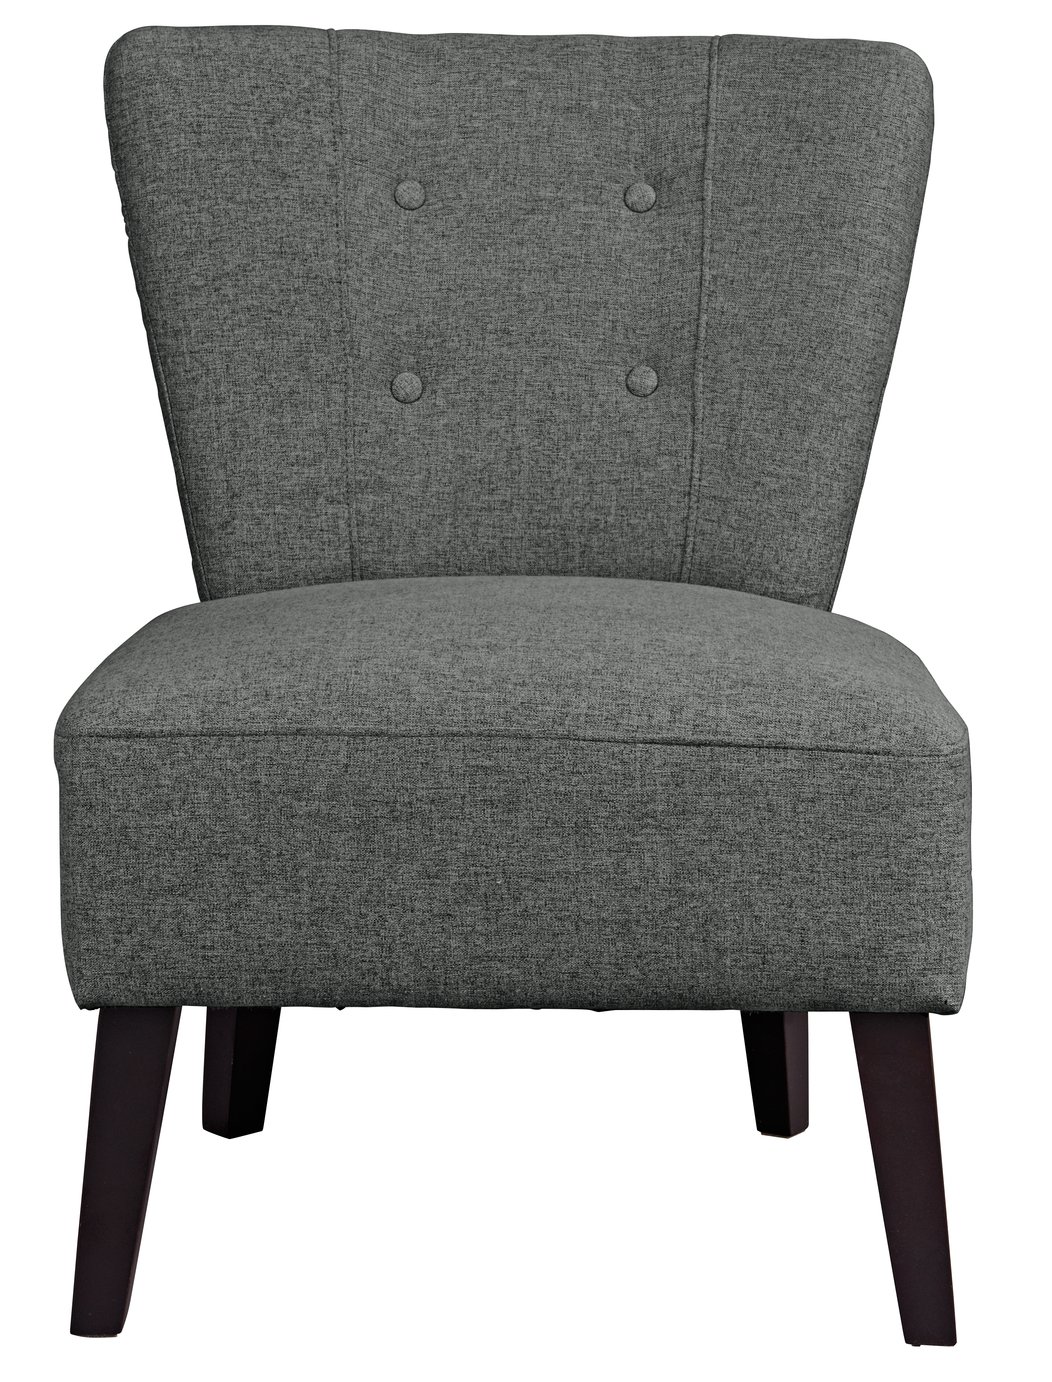 Habitat Delilah Fabric Cocktail Chair - Charcoal